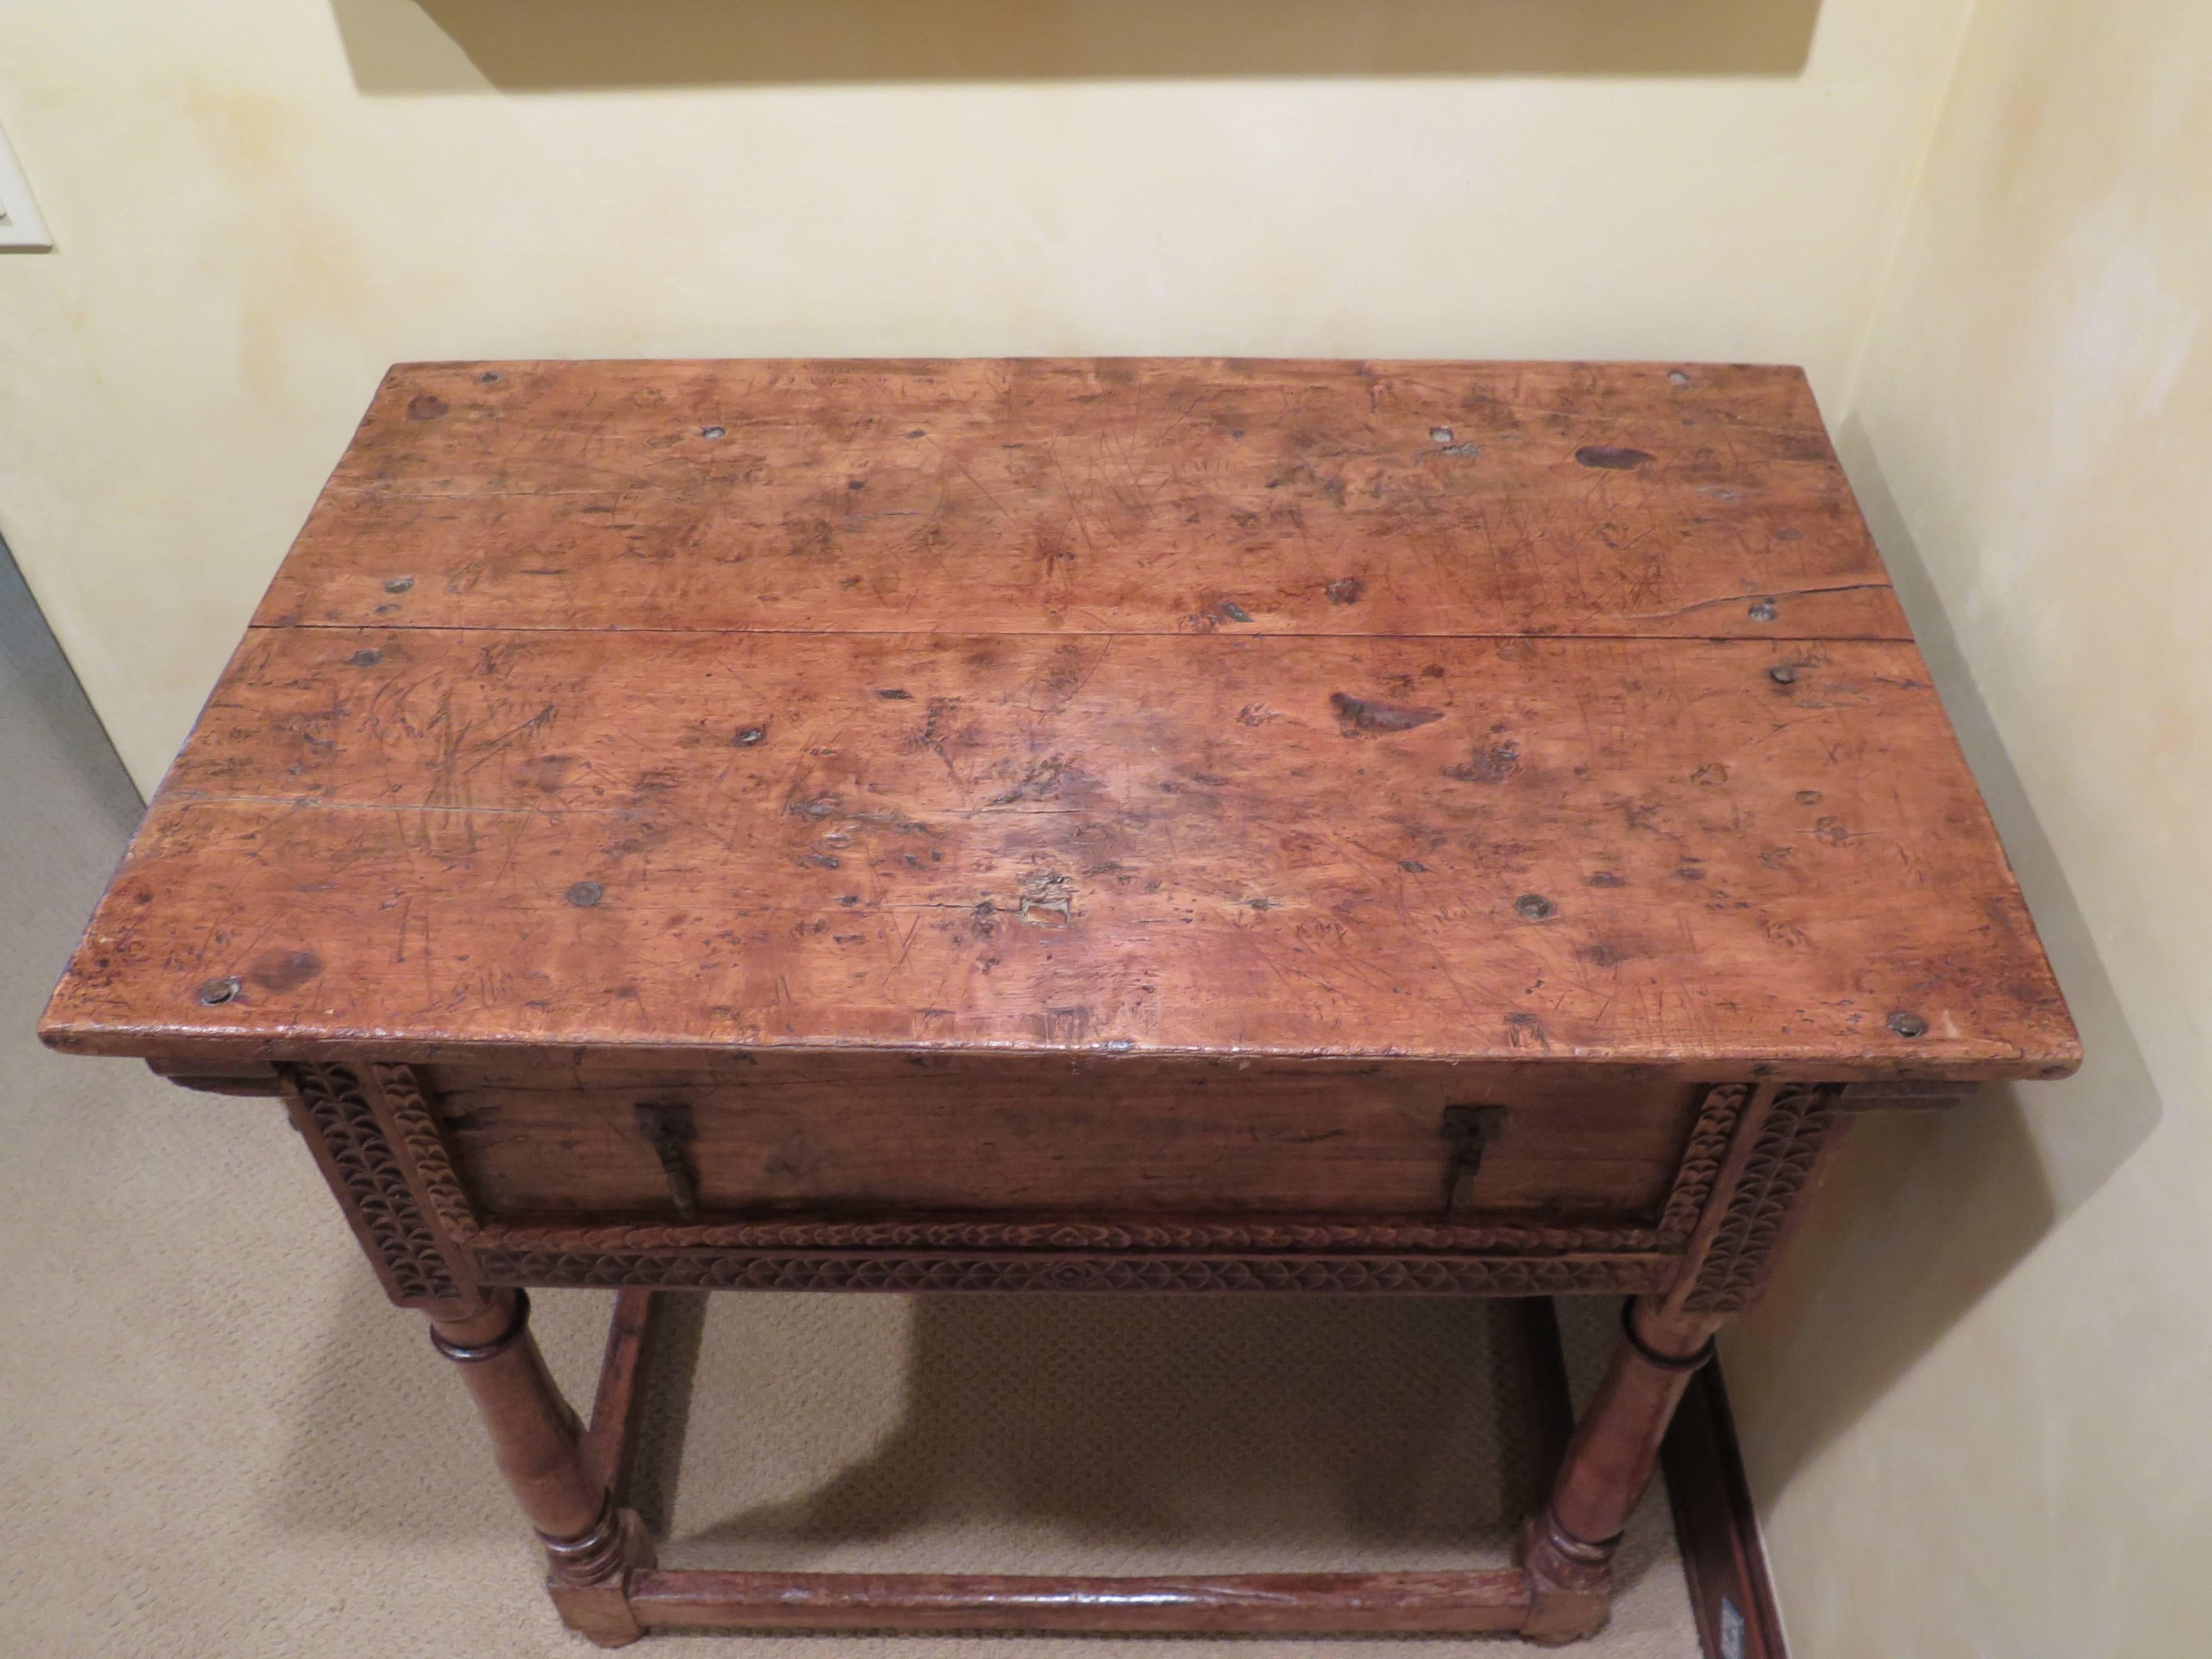 Very fine 18th century Spanish Colonial table from Peru. Hand-carved details. Haskell Antiques. 